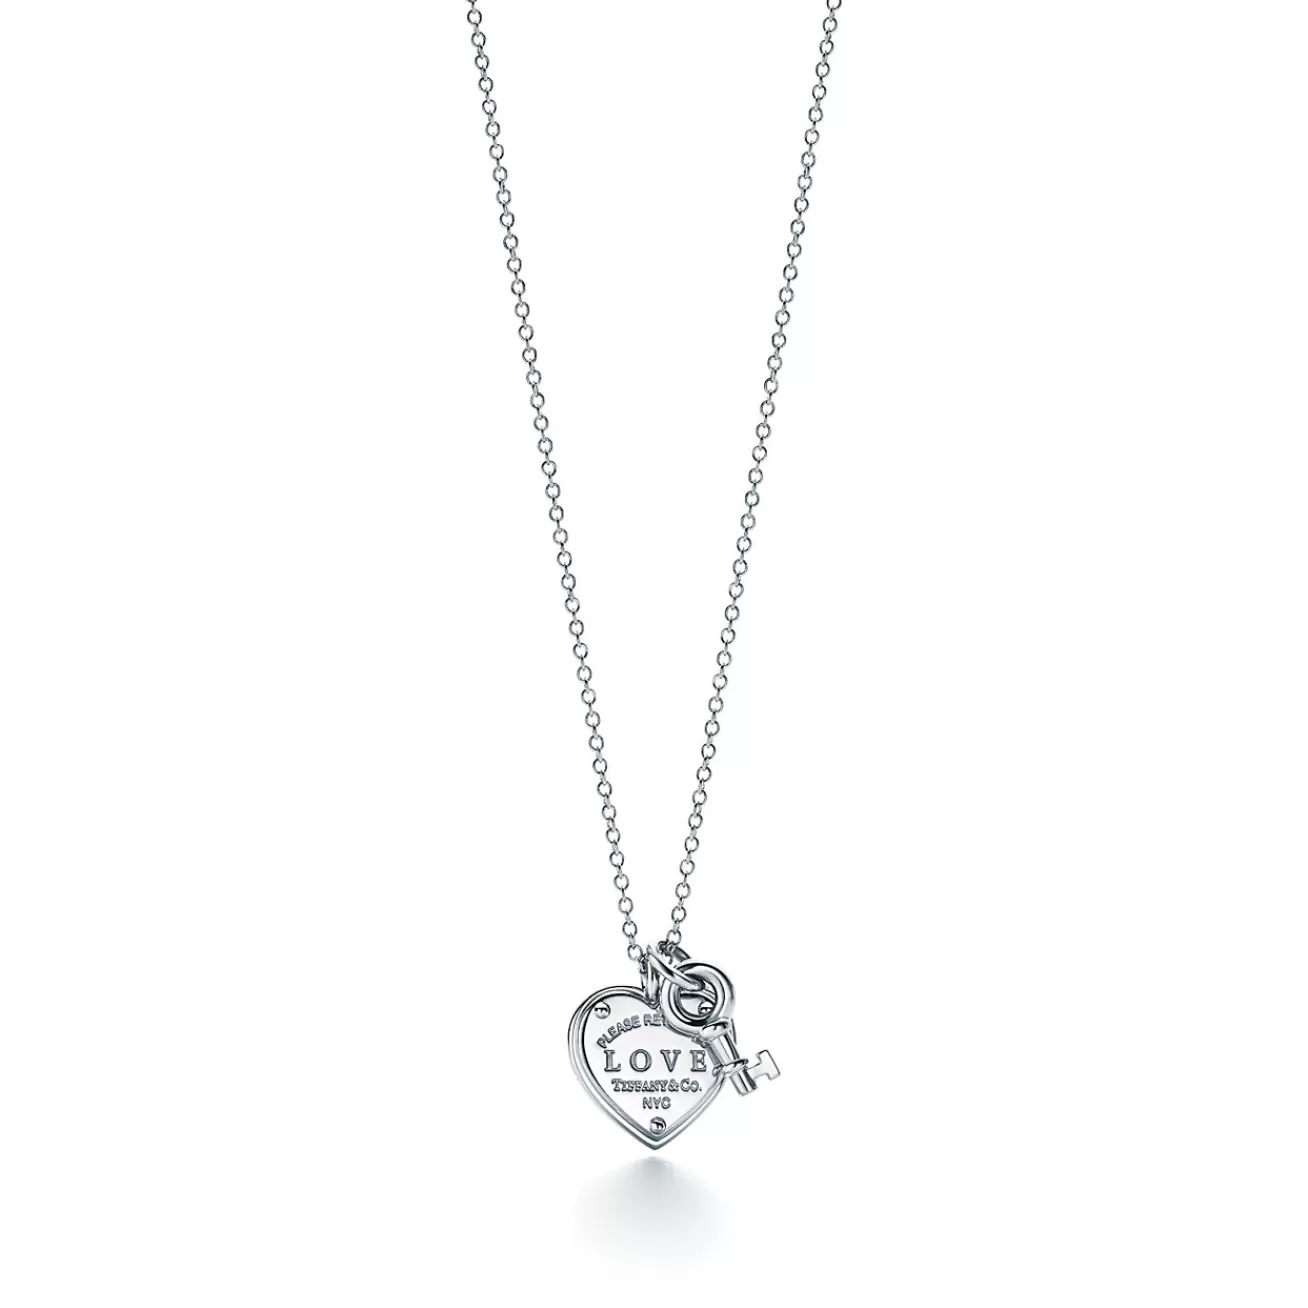 Tiffany & Co. Sterling Silver Love Heart Tag and Key Pendant | ^ Necklaces & Pendants | Sterling Silver Jewelry